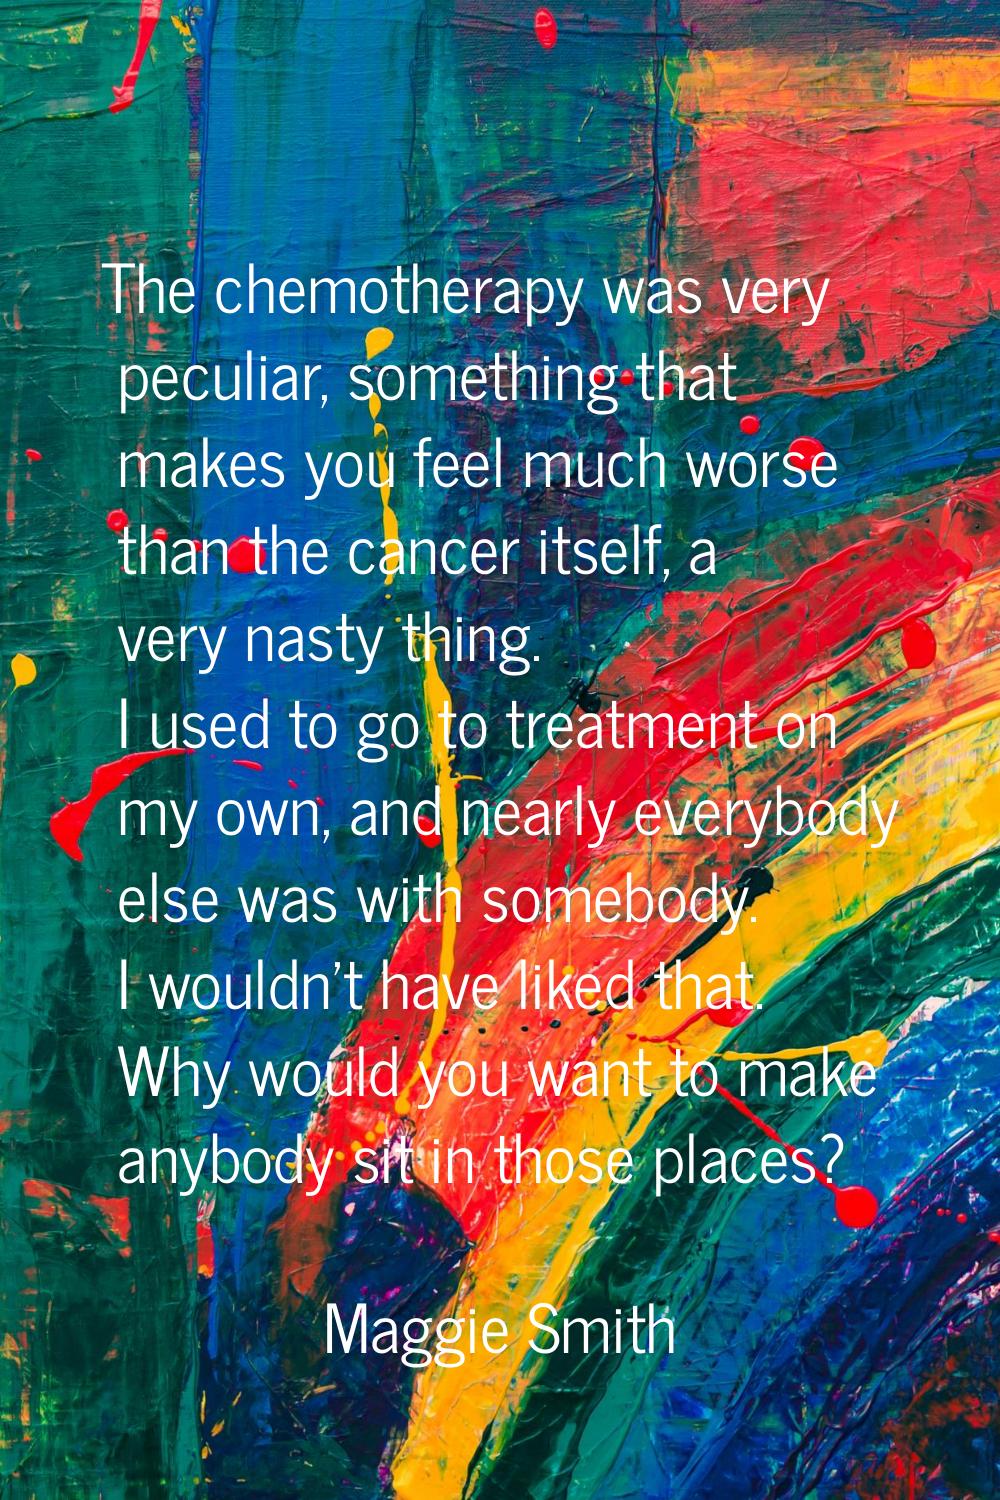 The chemotherapy was very peculiar, something that makes you feel much worse than the cancer itself